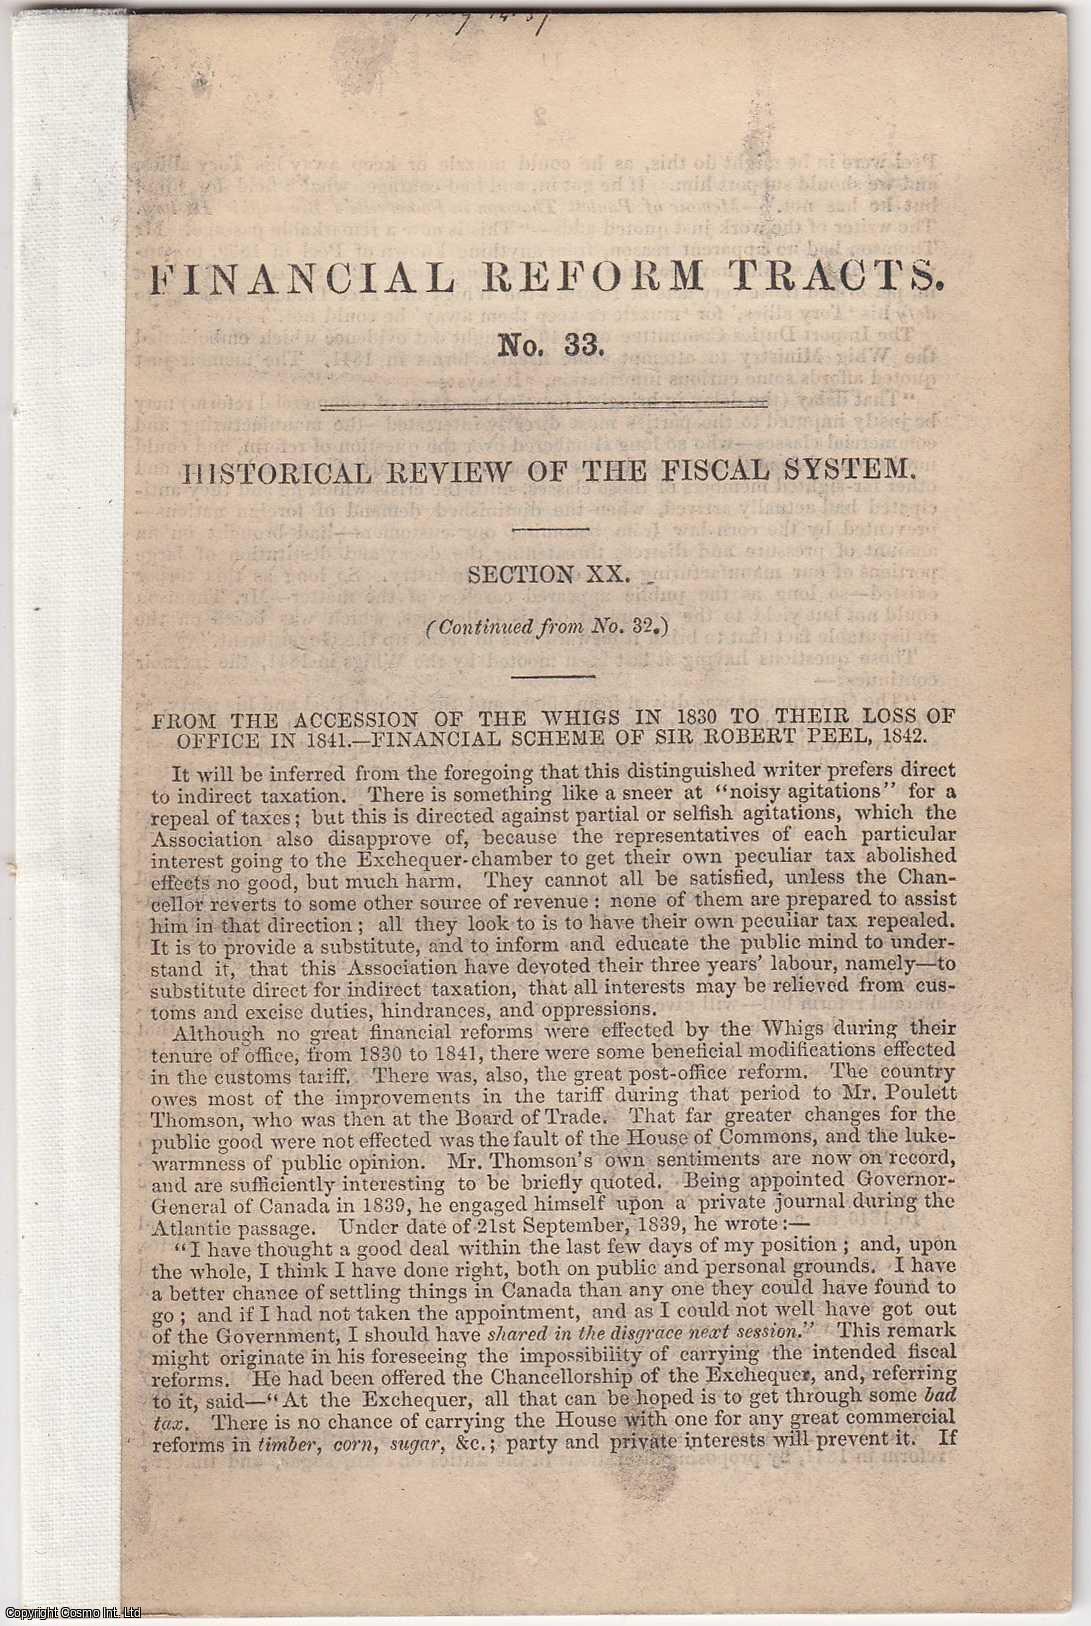 No Author Stated - [1851] Historical Review of the Fiscal System. Financial Reform Tracts No 33, 34, 35.